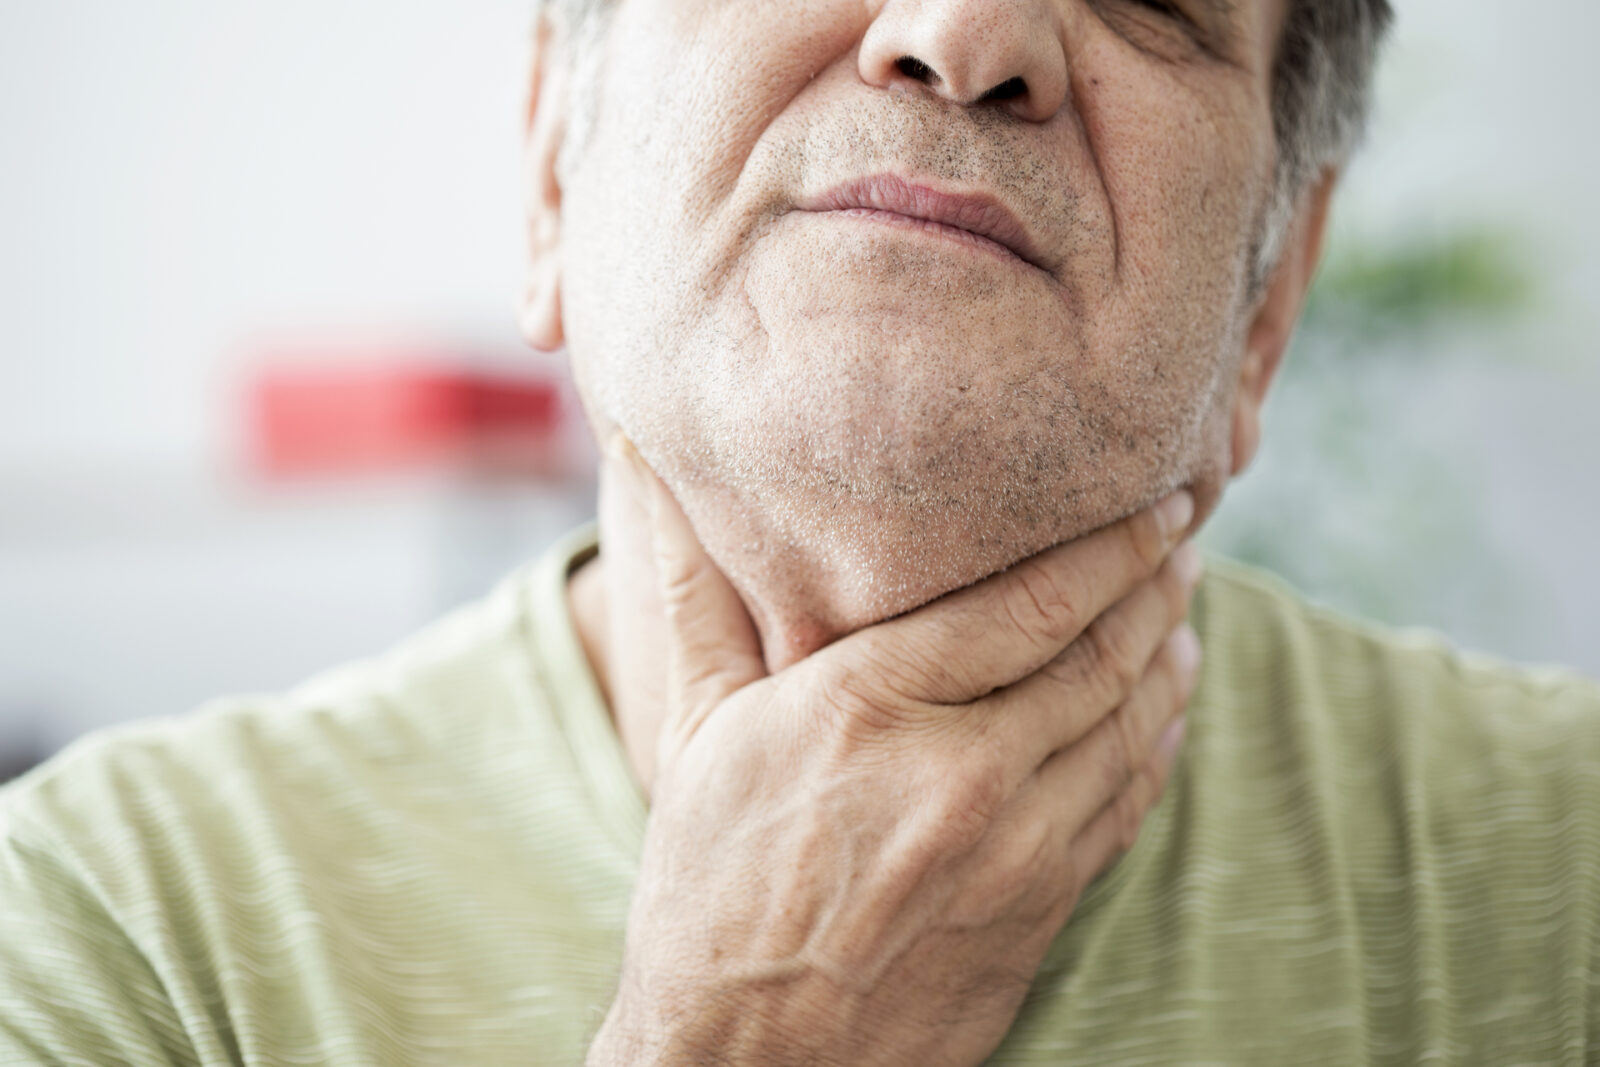 Man grabbing throat possibly dealing with Aging Voice